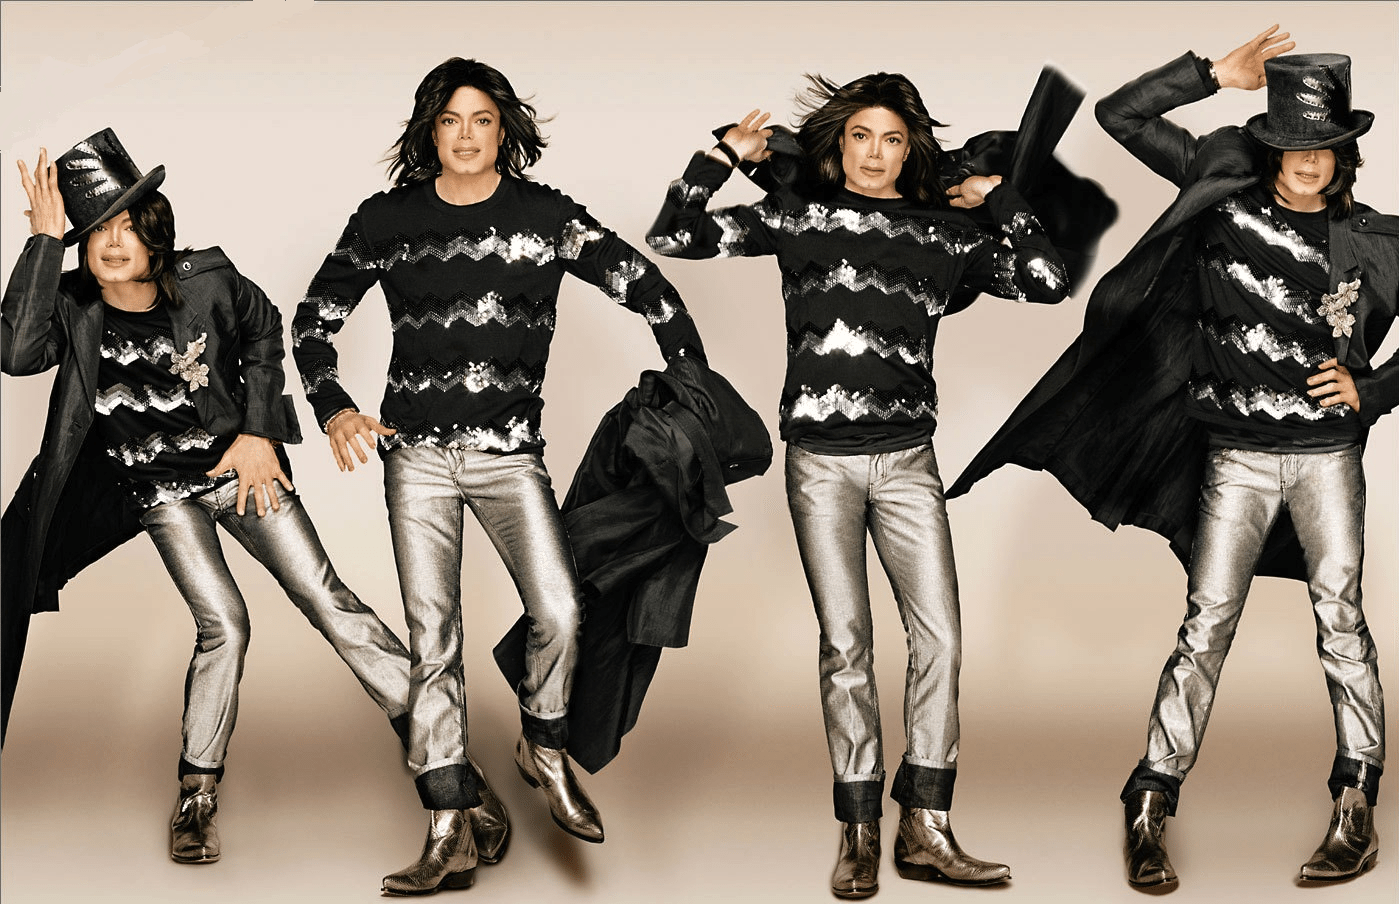 Michael Jackson fashion: MJ's iconic songs remembered through his